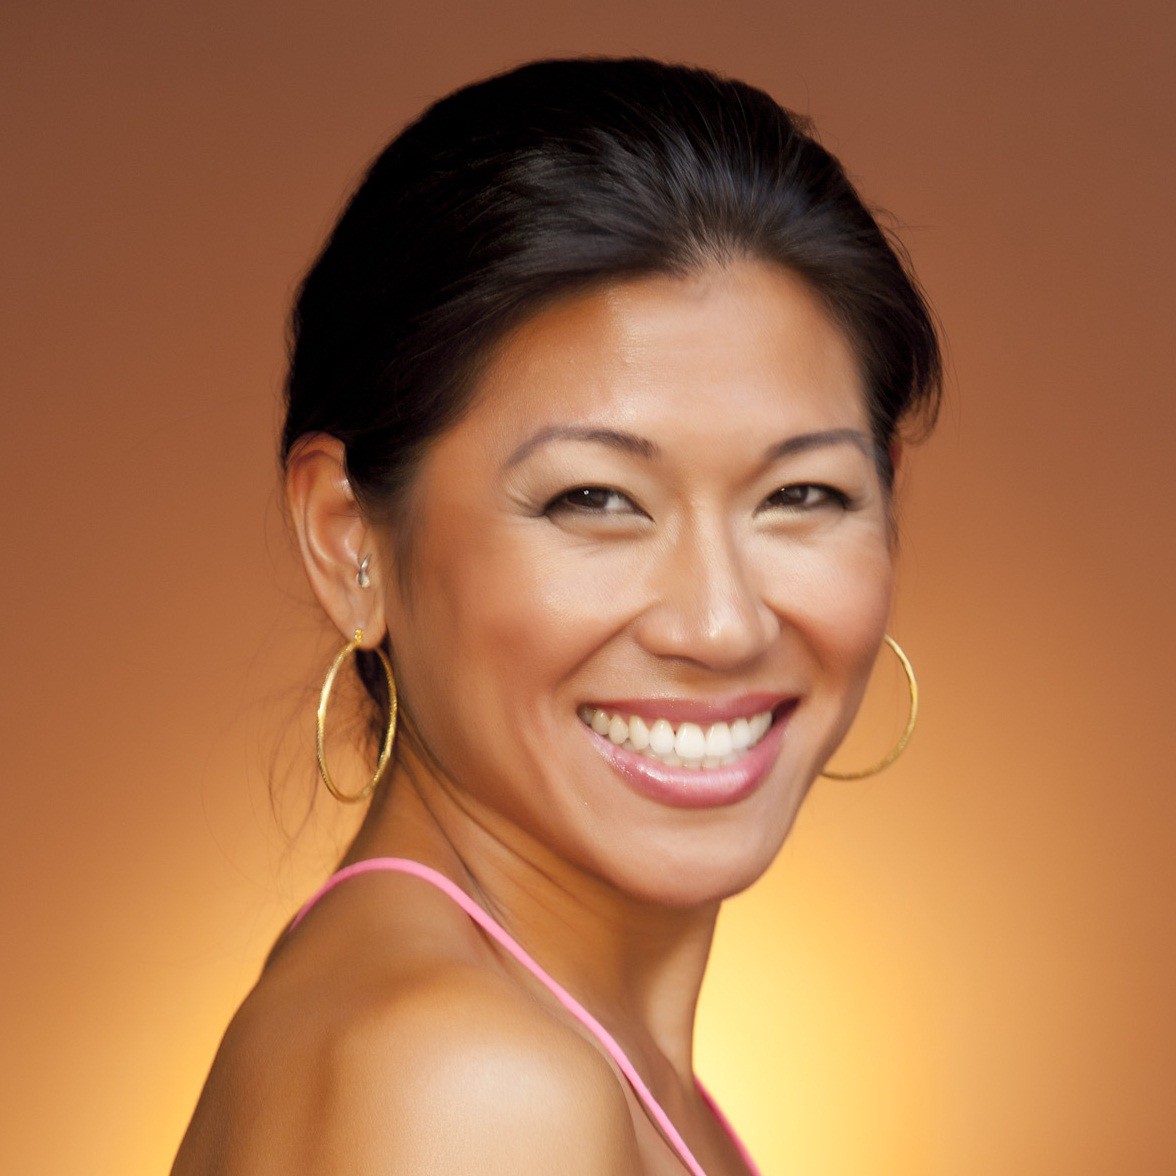 https://www.bestphysicaltherapistnyc.com/wp-content/uploads/2020/01/dr-karena-wu-best-physical-therapist-nyc-2020.jpeg